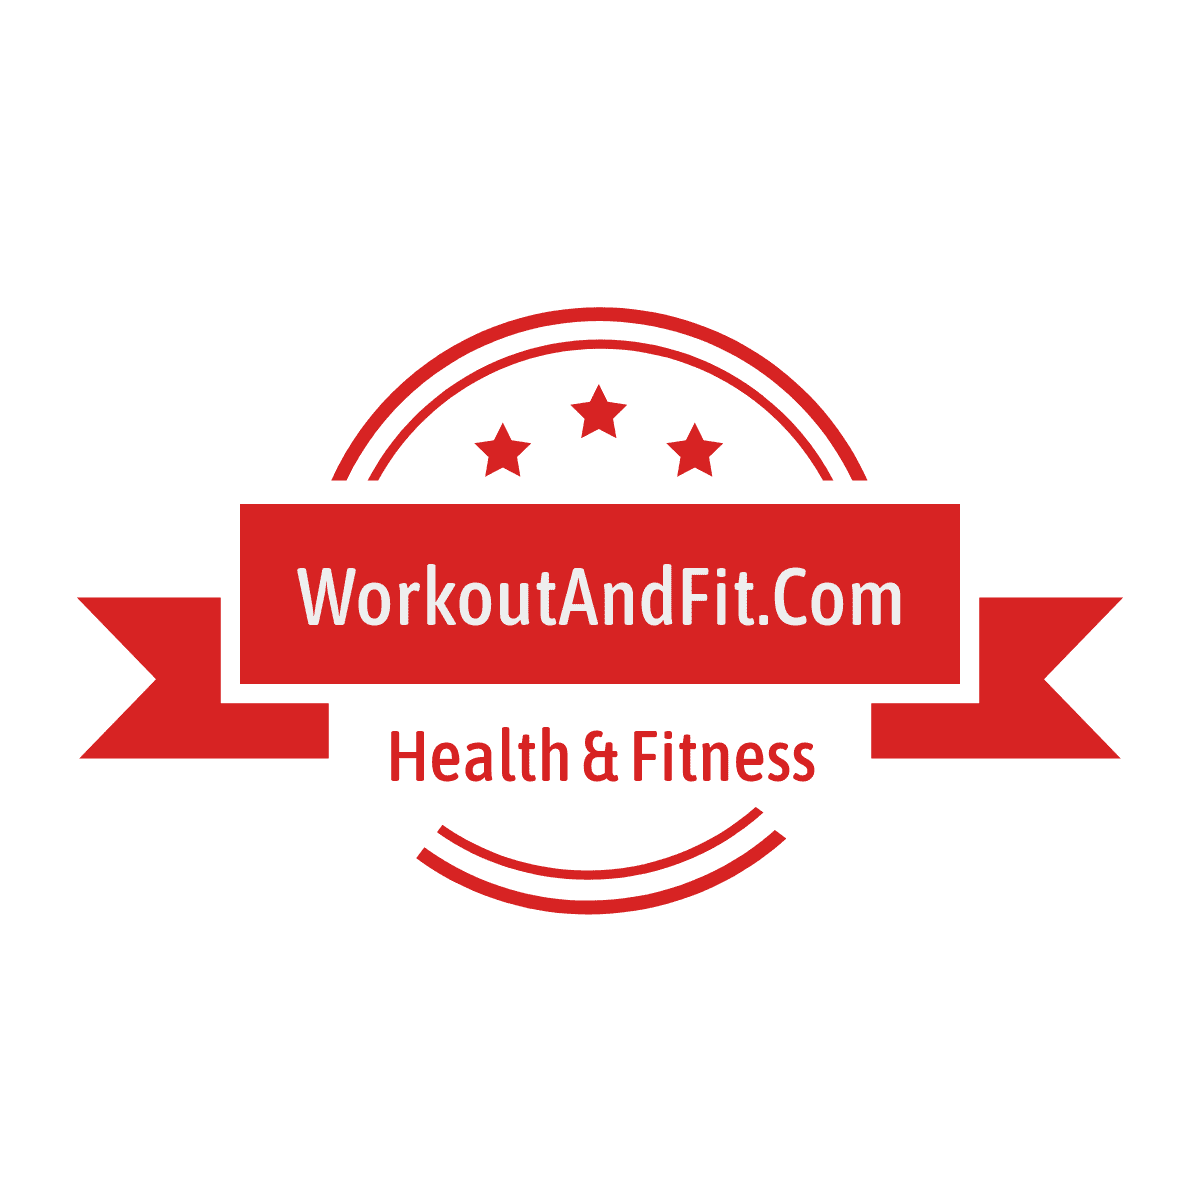 Workout And Fitness